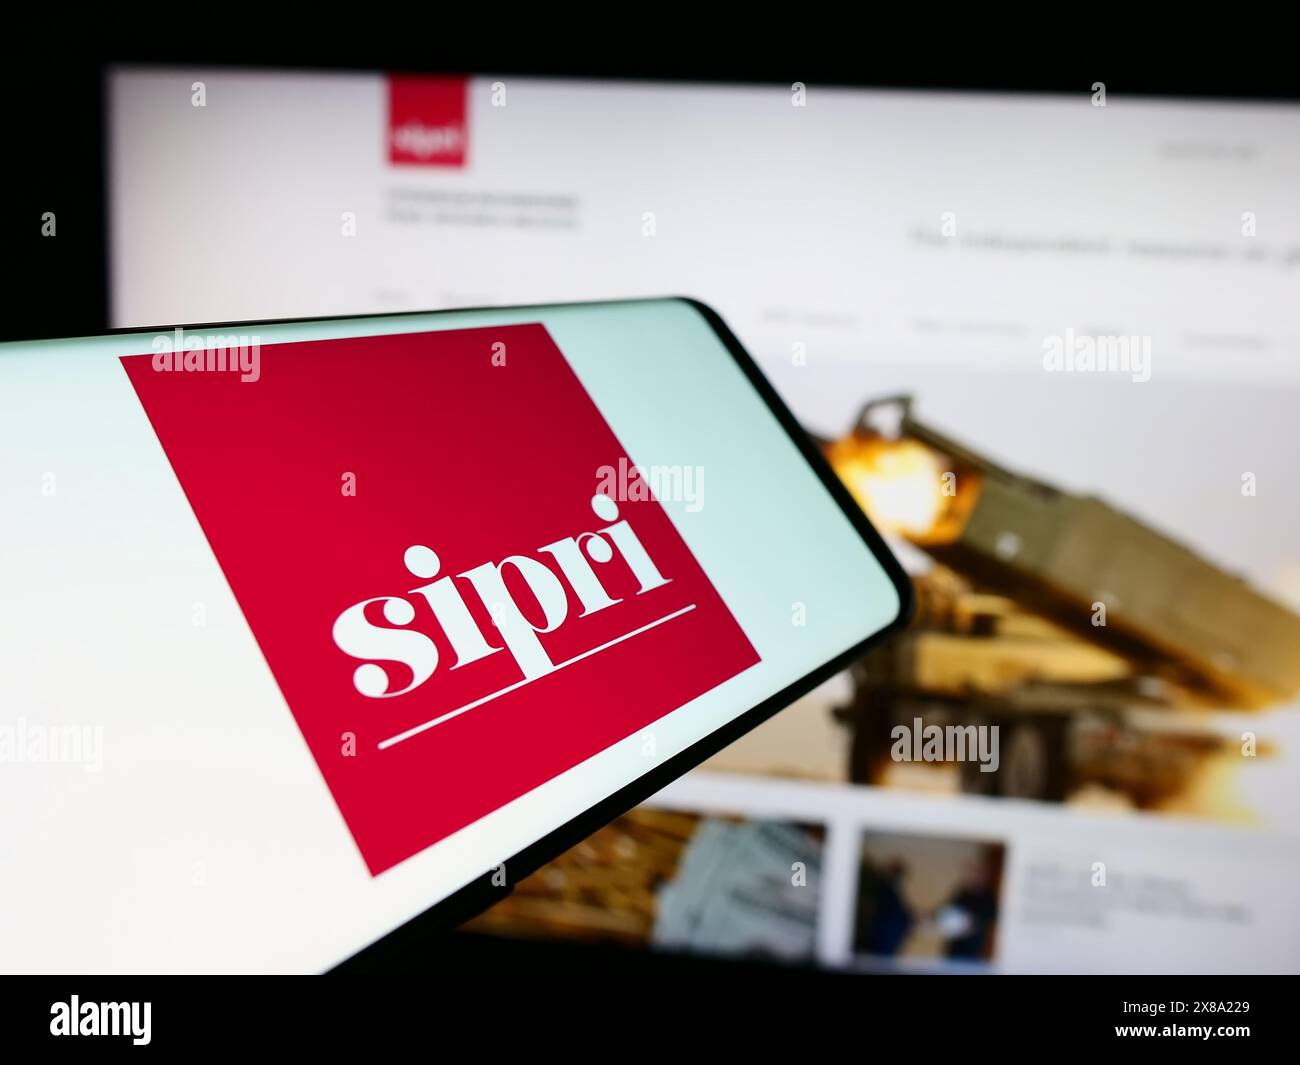 Mobile phone with logo of Stockholm International Peace Research Institute (SIPRI) in front of website. Focus on center-right of phone display. Stock Photo